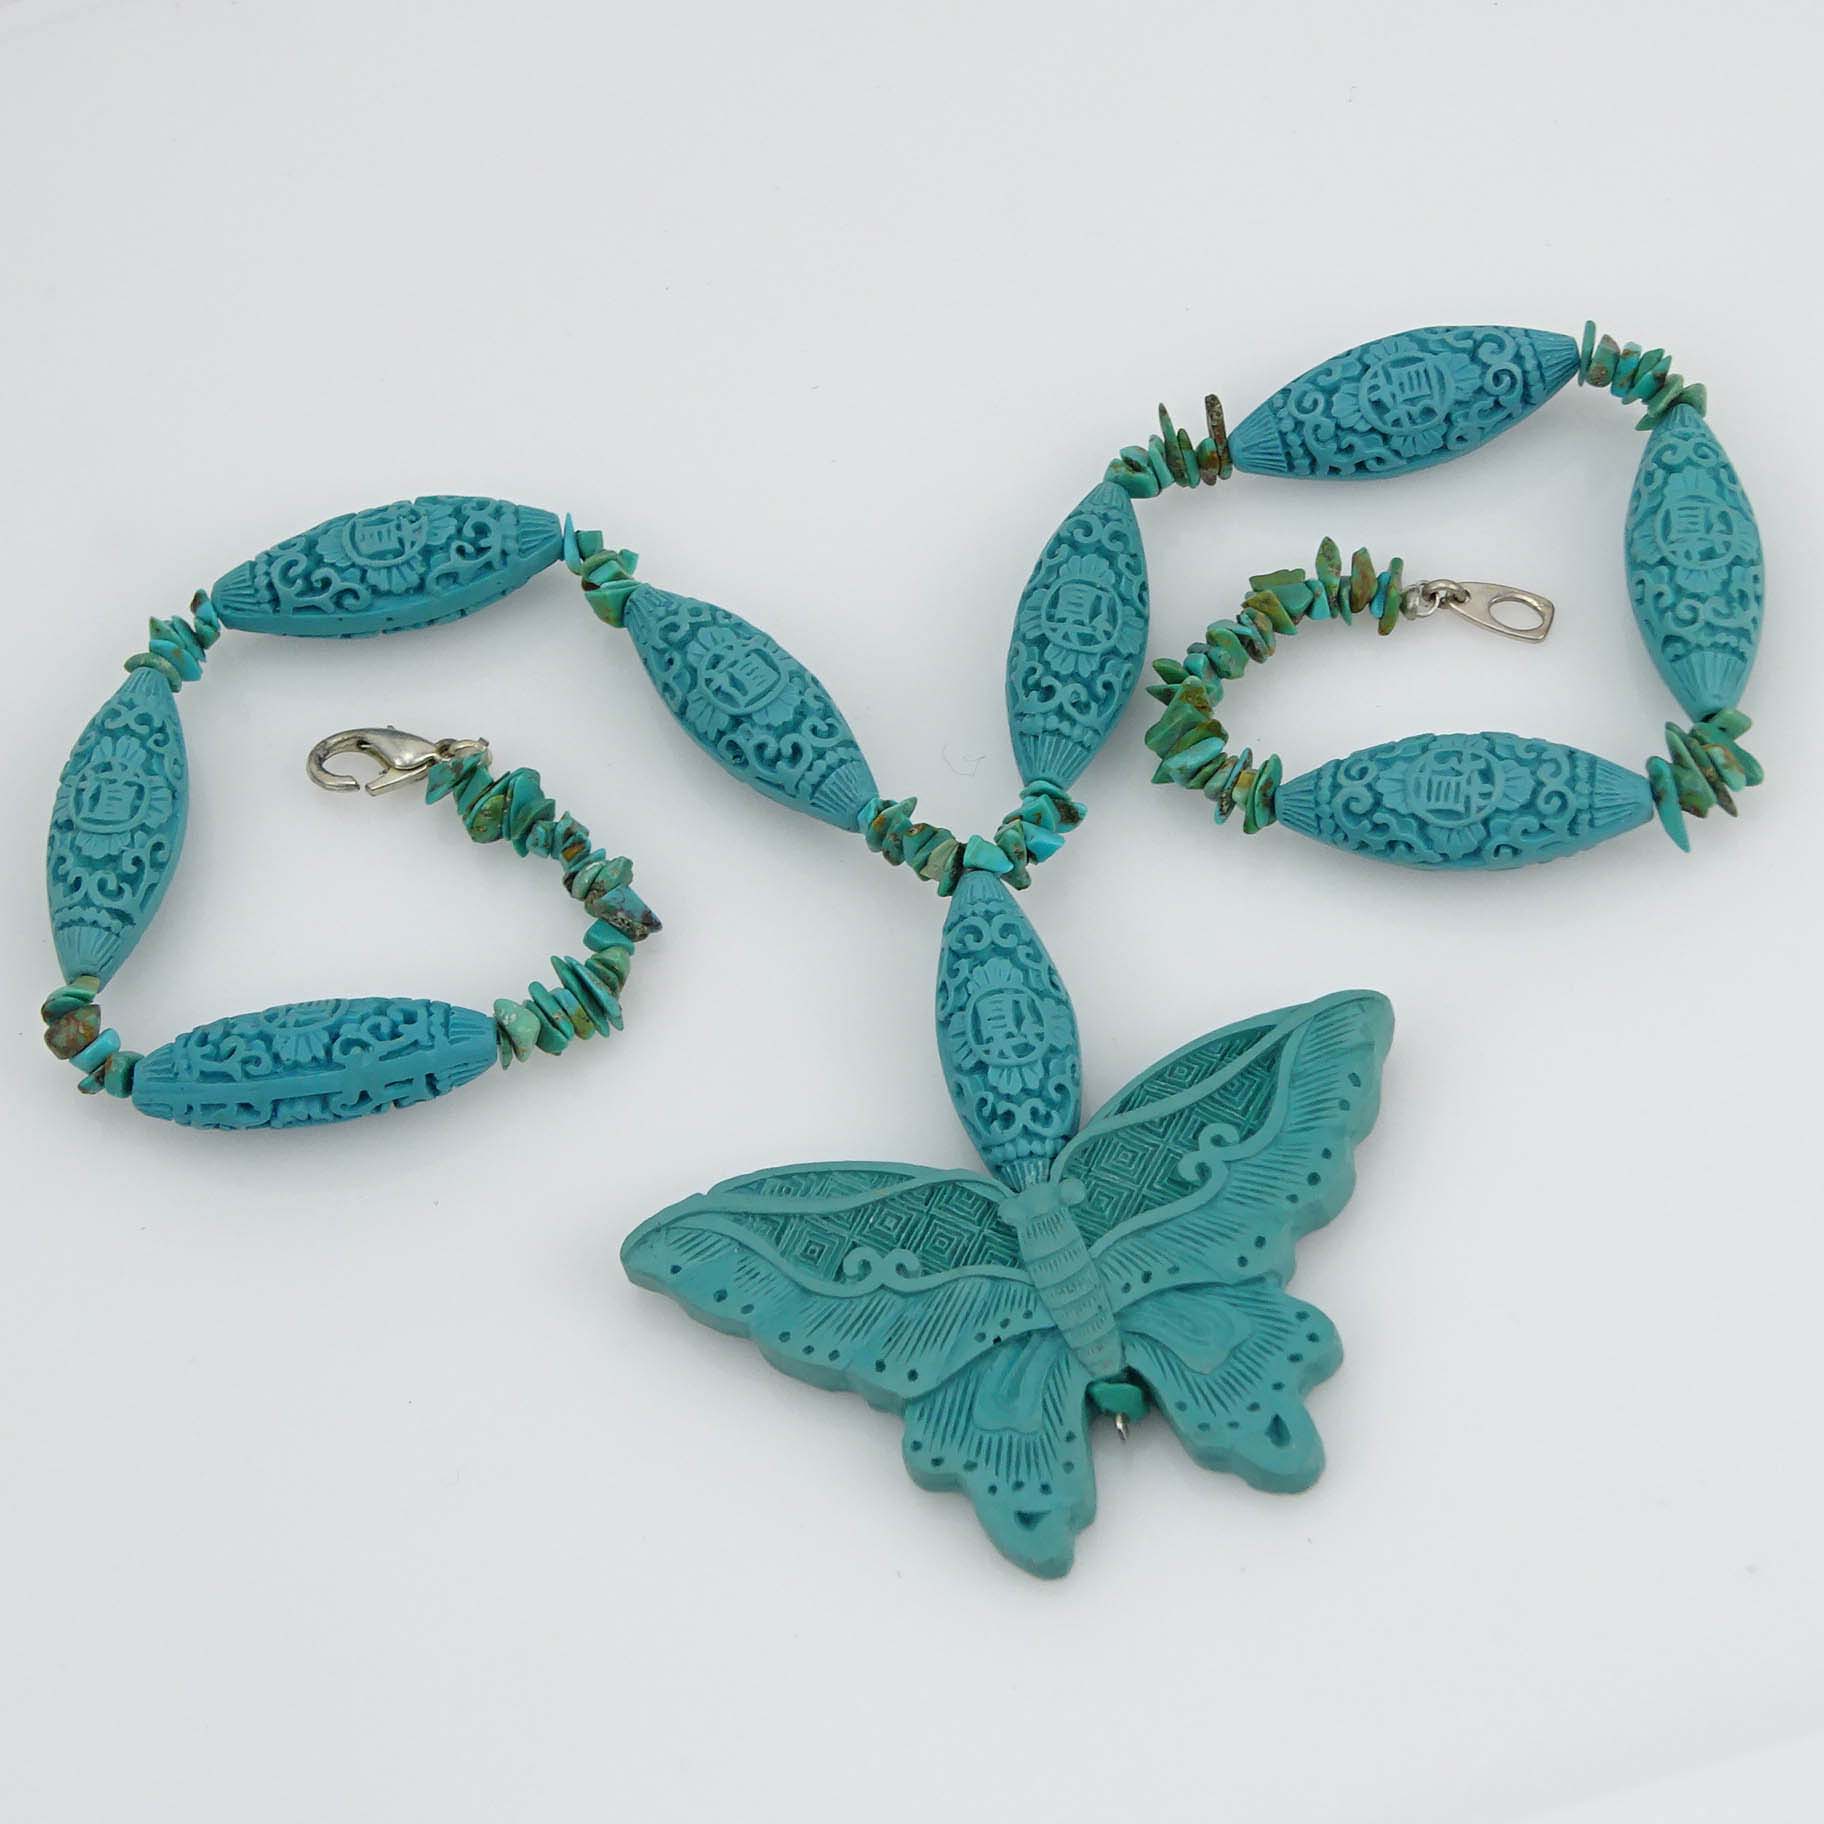 Vintage Chinese Turquoise Bead and Decorative Faux Carved Lacquer Bead Necklace with Butterfly Pendant.